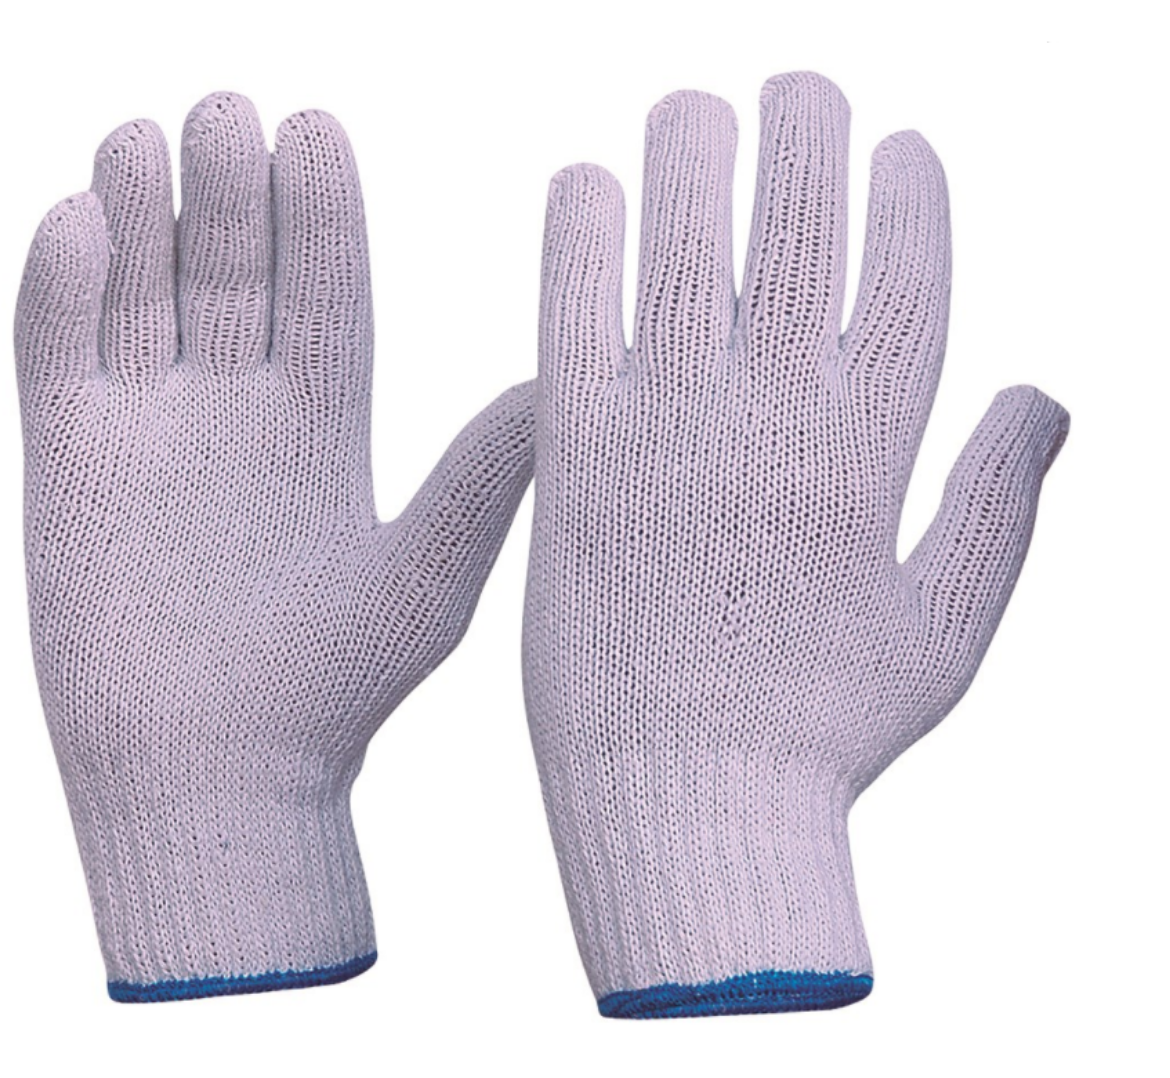 Picture of KNITTED POLY/COTTON GLOVE MEDIUM